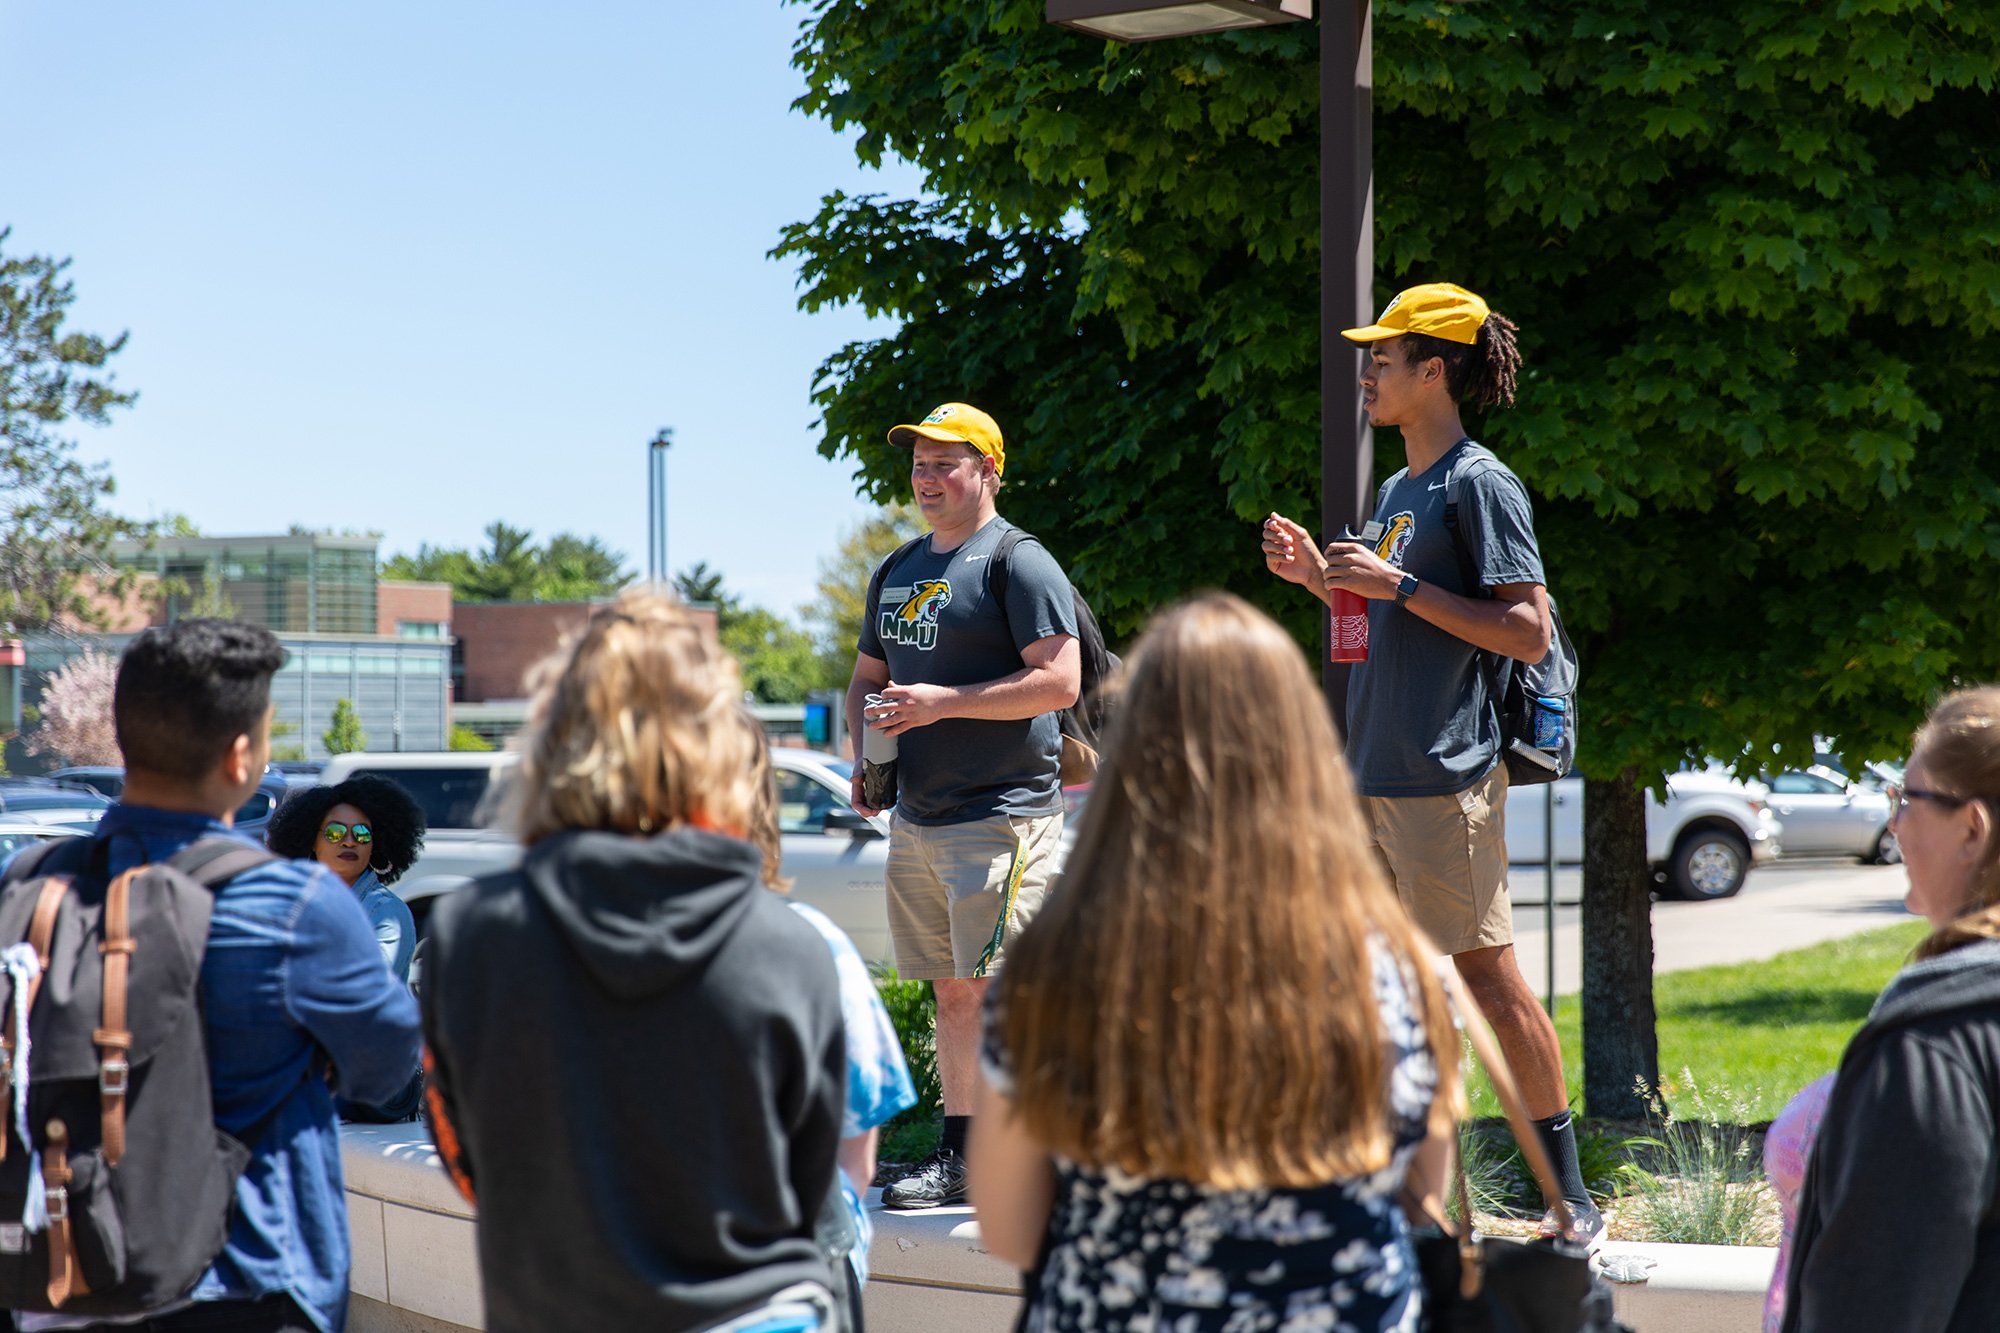 Two NMU students leading a campus visit